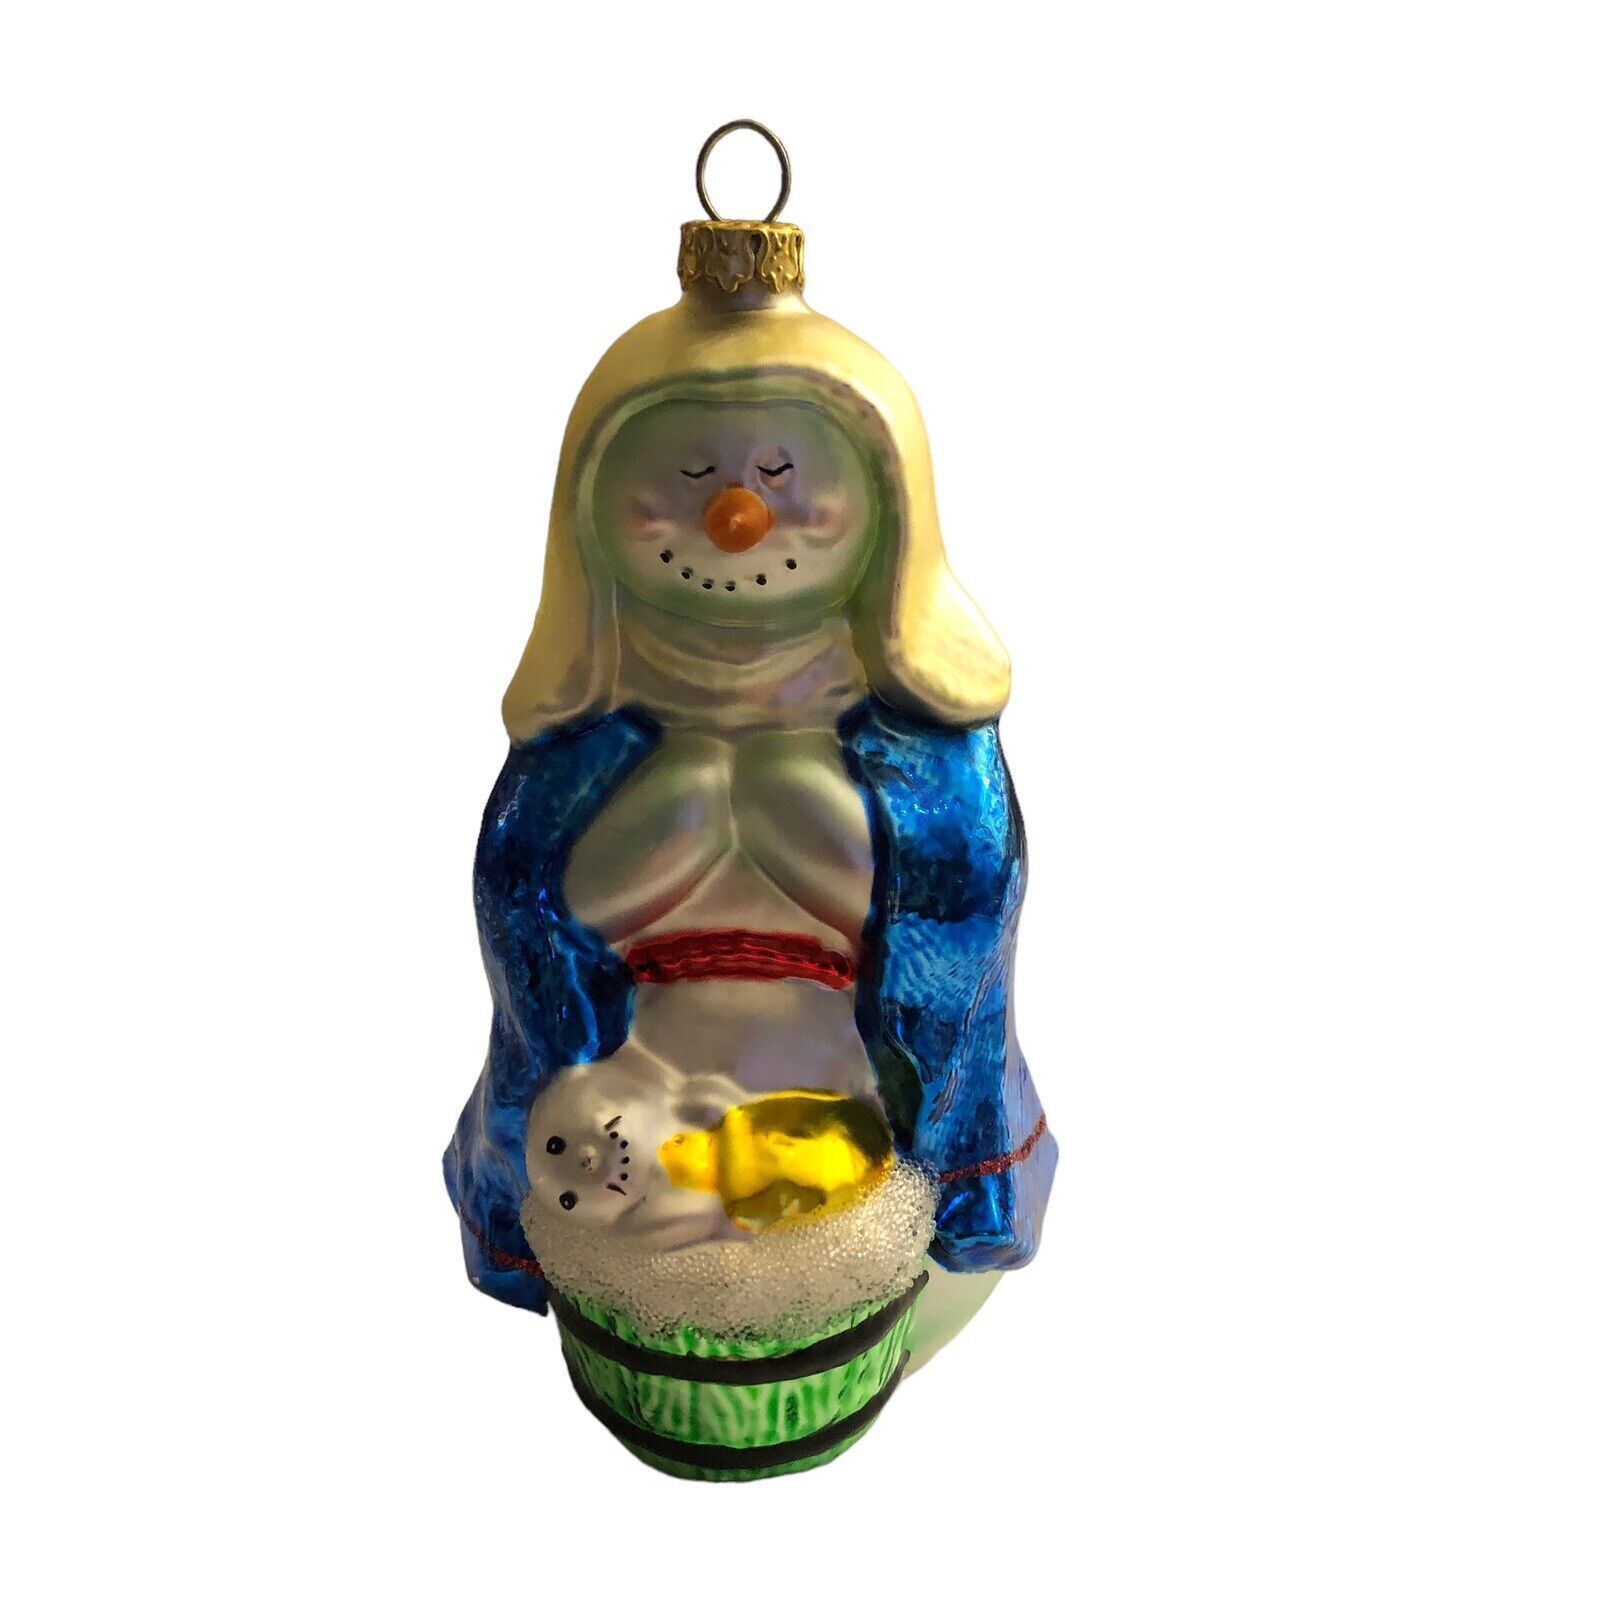 Mary & Baby Jesus as Snowman Carrot Nose Christmas Tree Ornament Glass RARE